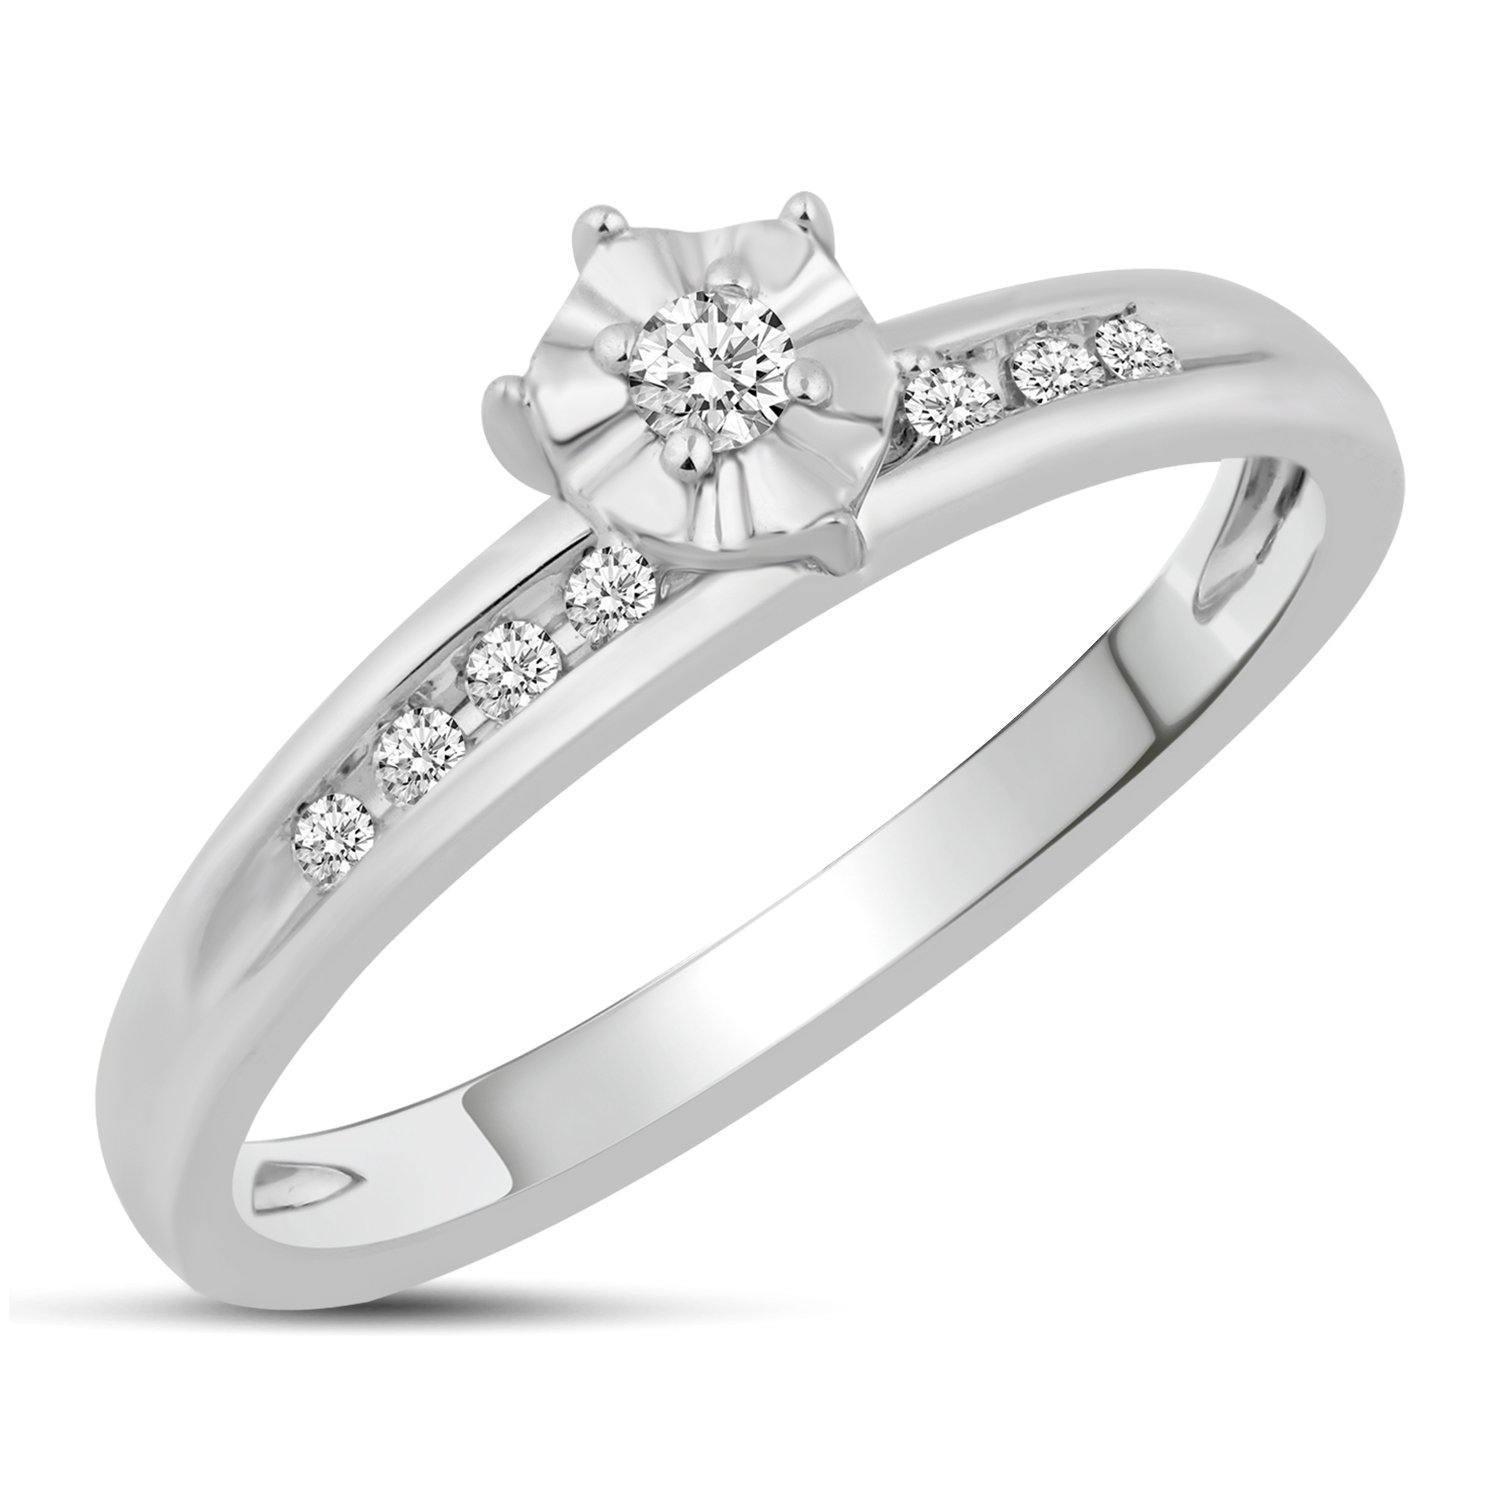 1/3CT TW Diamond Trio Bridal Set in 10KT White Gold - Fifth and Fine